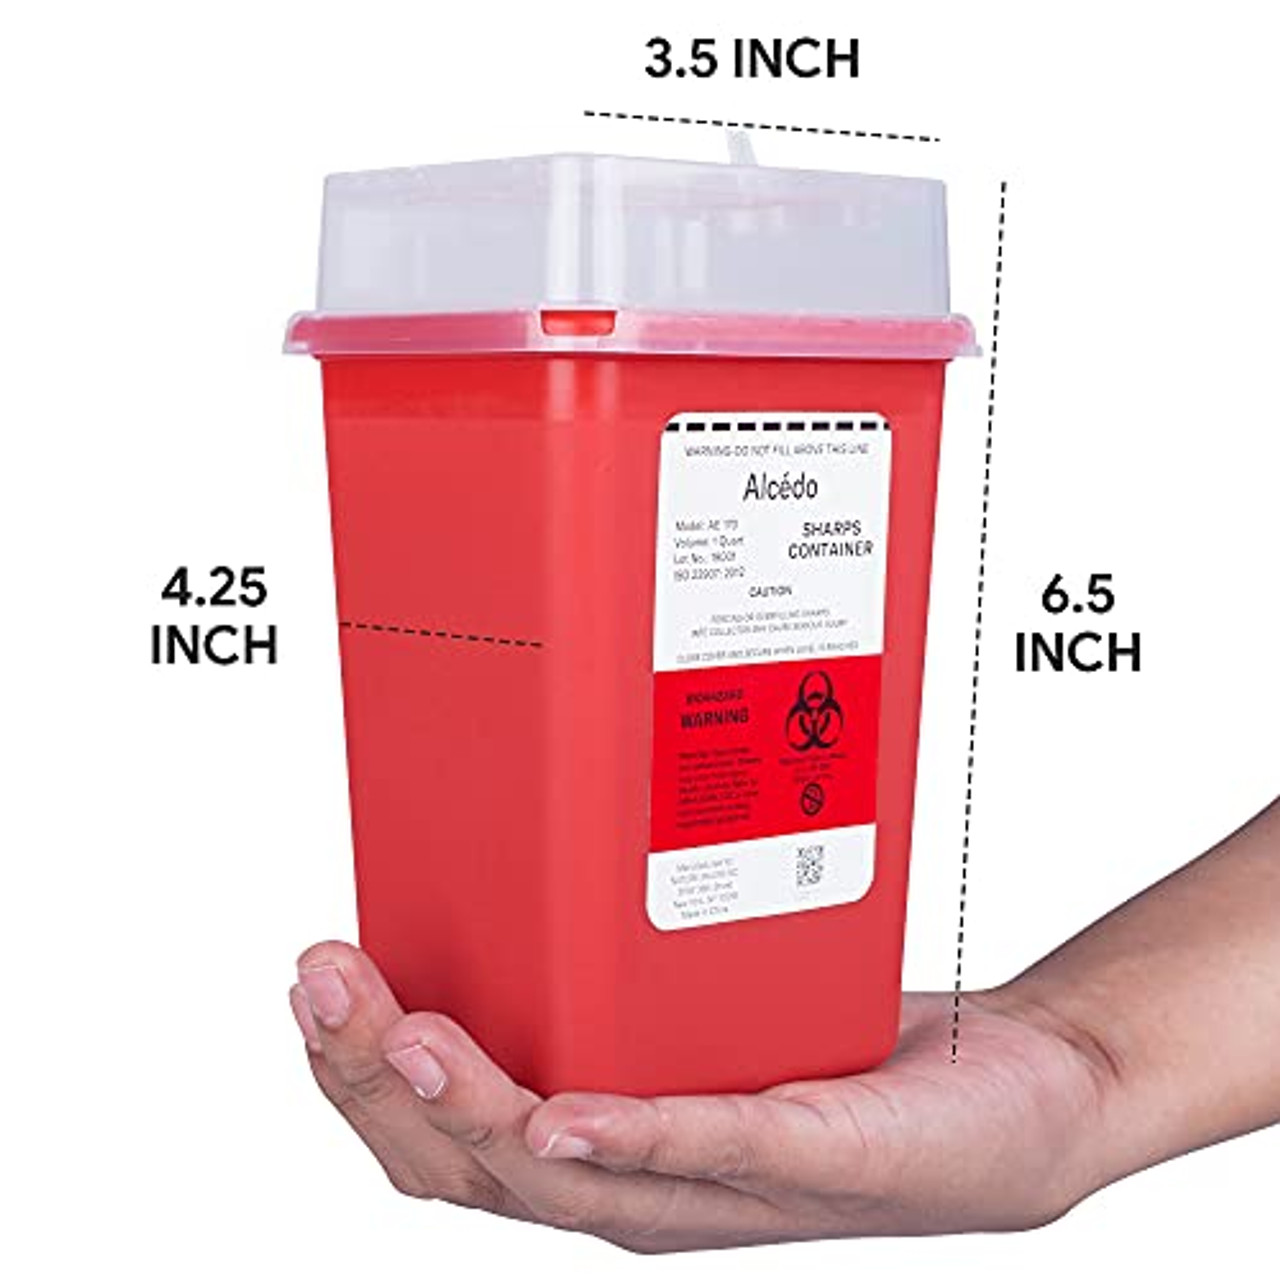 Alcedo Sharps Container for Home Use and Professional 1 Quart (5-Pack),  Biohazard Needle and Syringe